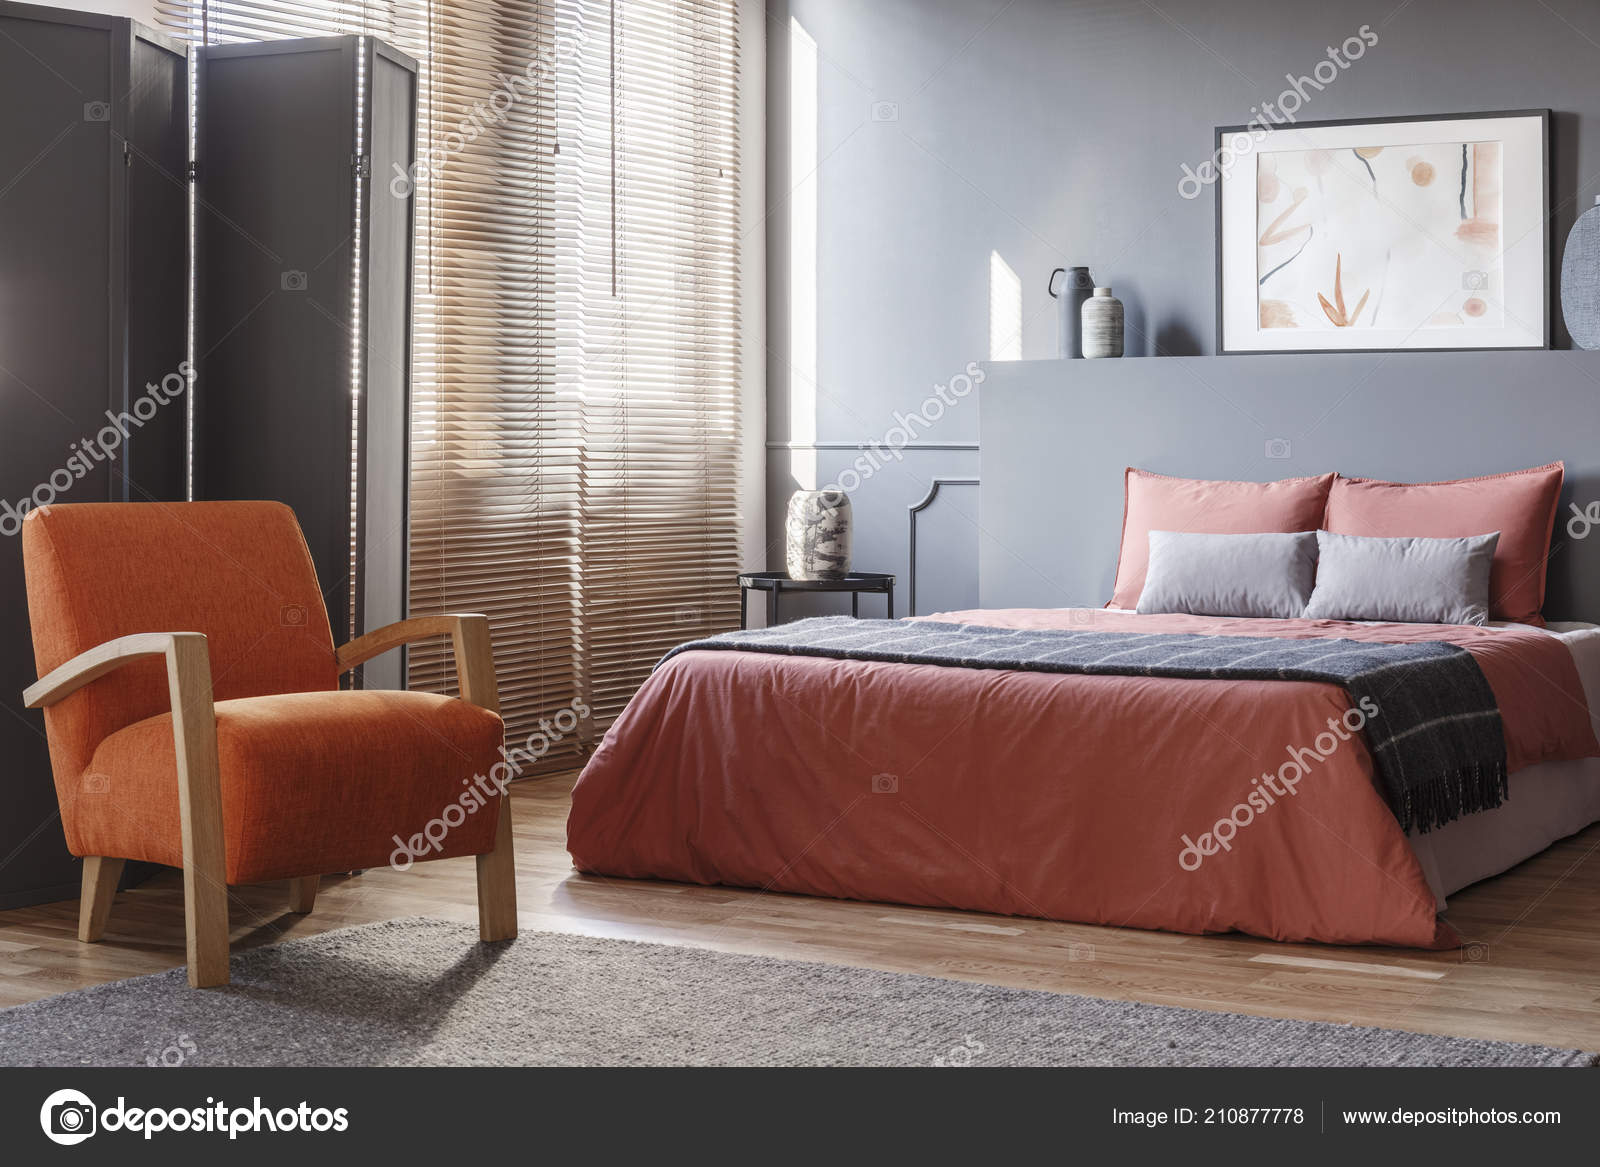 orange armchair next to pink bed in modern grey bedroom interior with  screen and poster 210877778